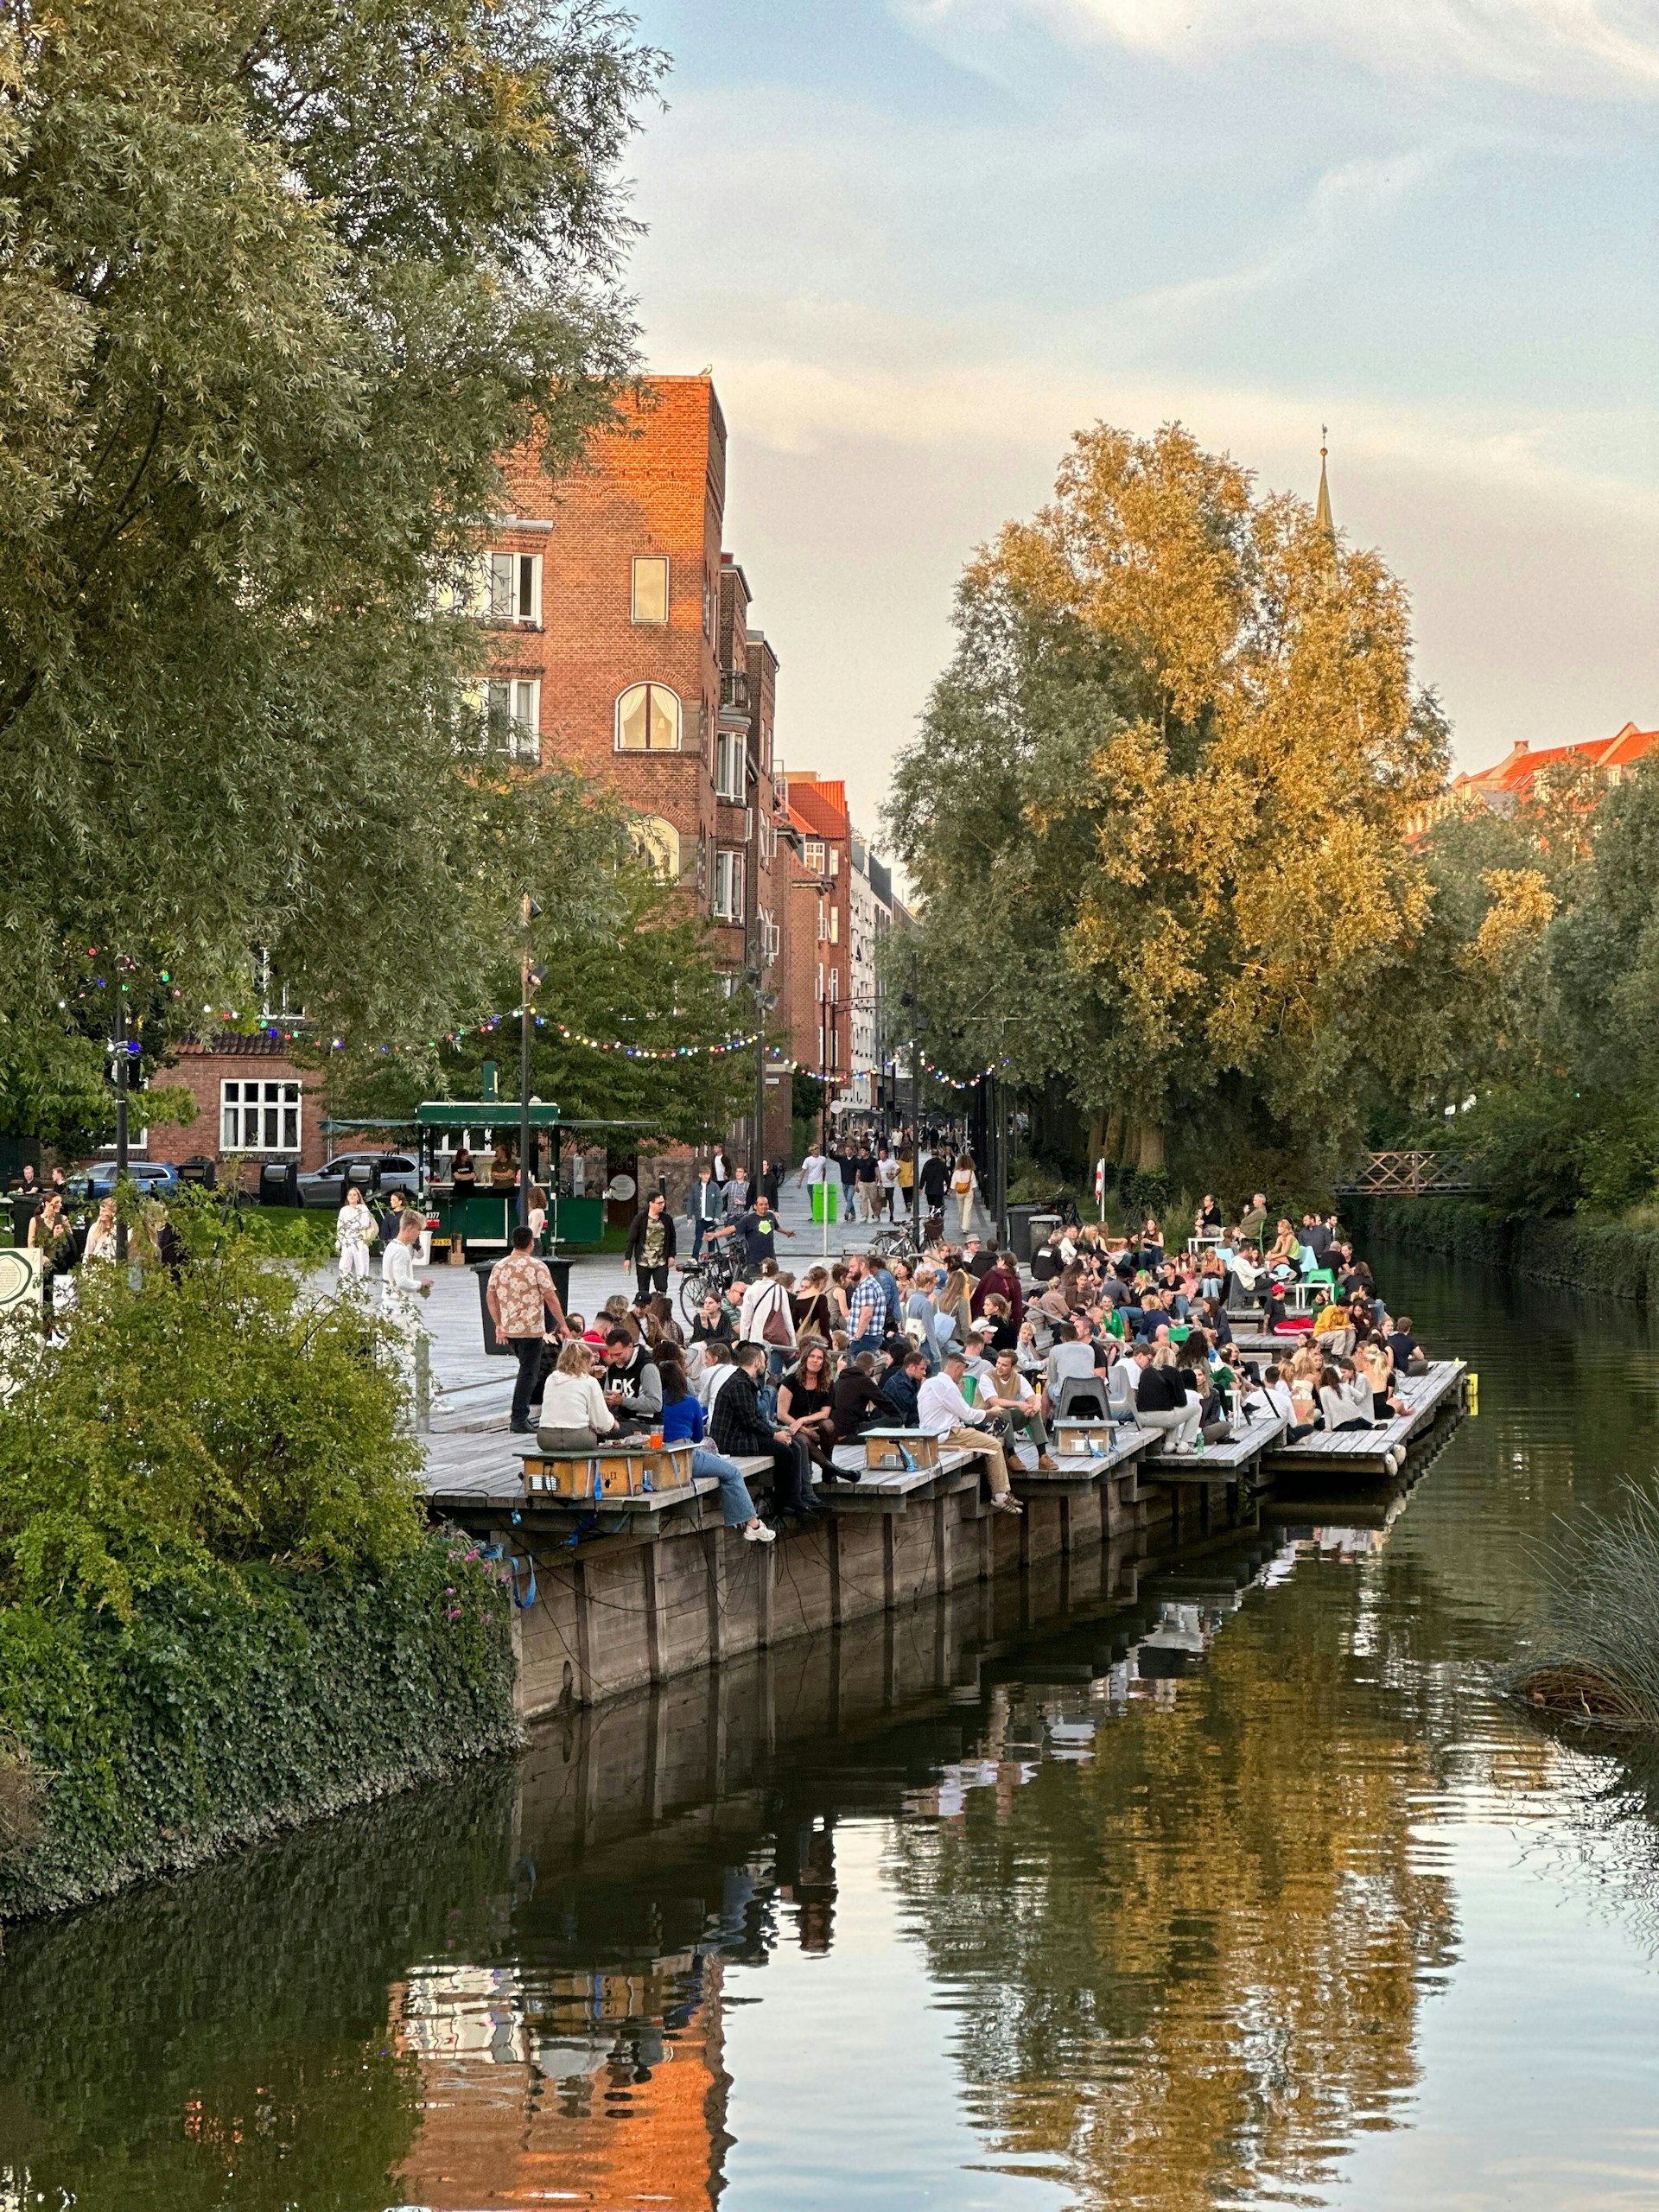 People are sat out on decking with drinks near a canal running through a town